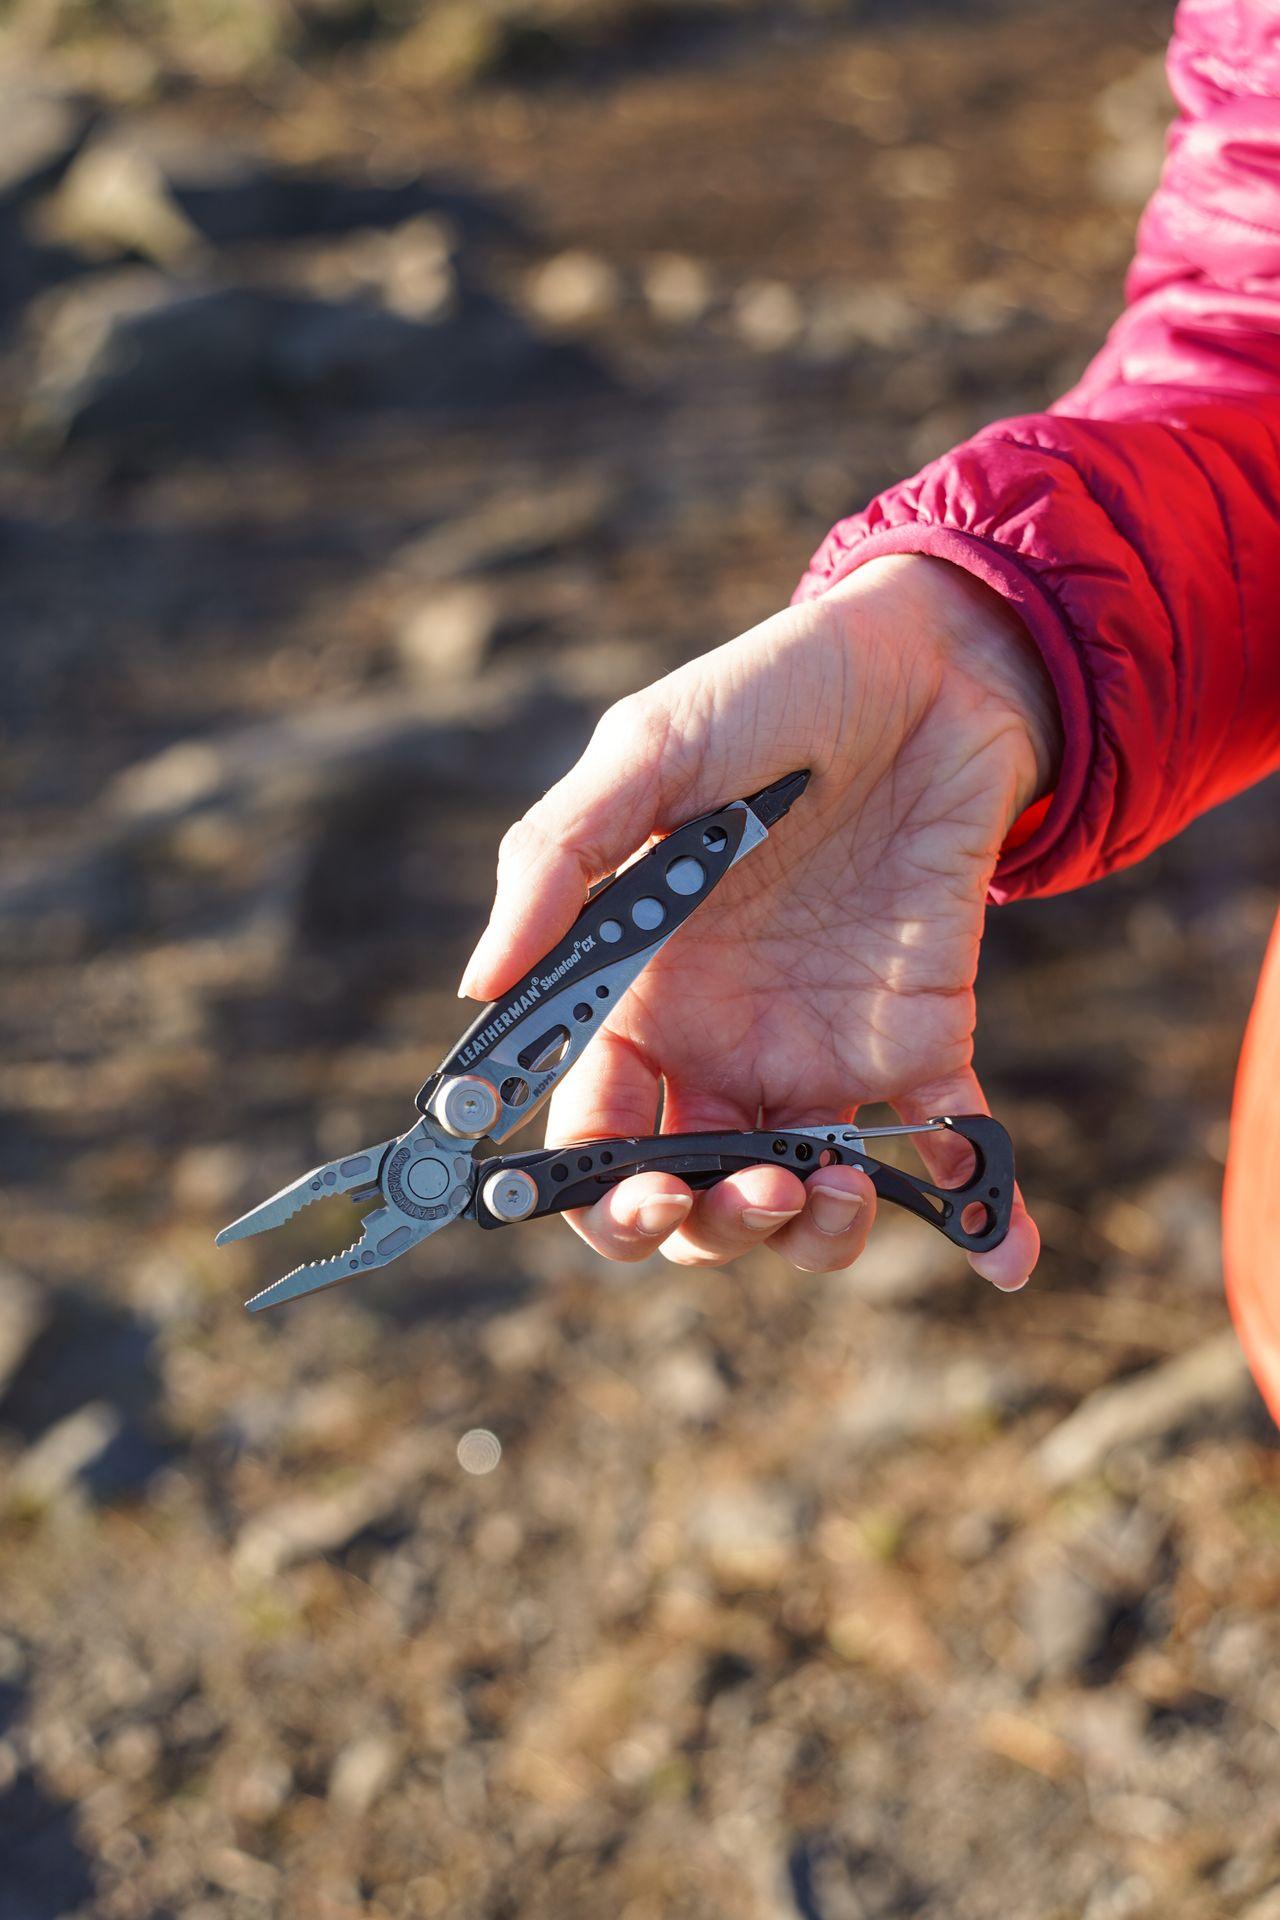 Holding the Leatherman Skeletool, a multi-tool that is black and silver.